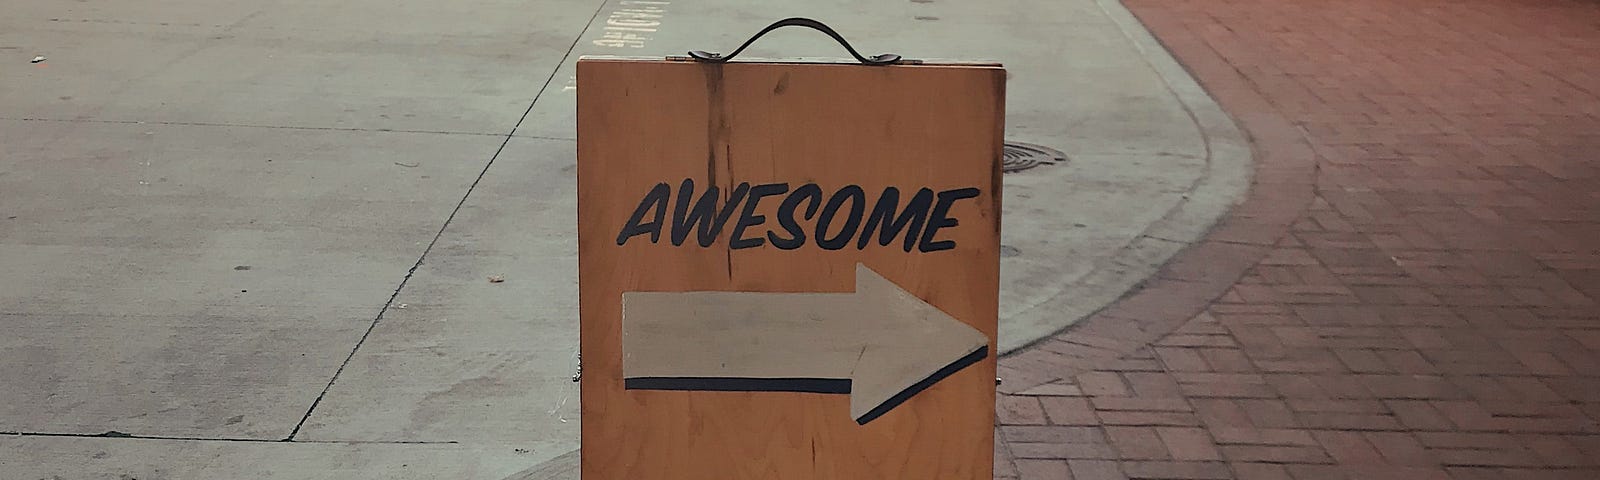 A sign on a walkway with an arrow showing left and one to the right. It reads “awesome” over the arrow leading to the right and “less awesome” over the other.